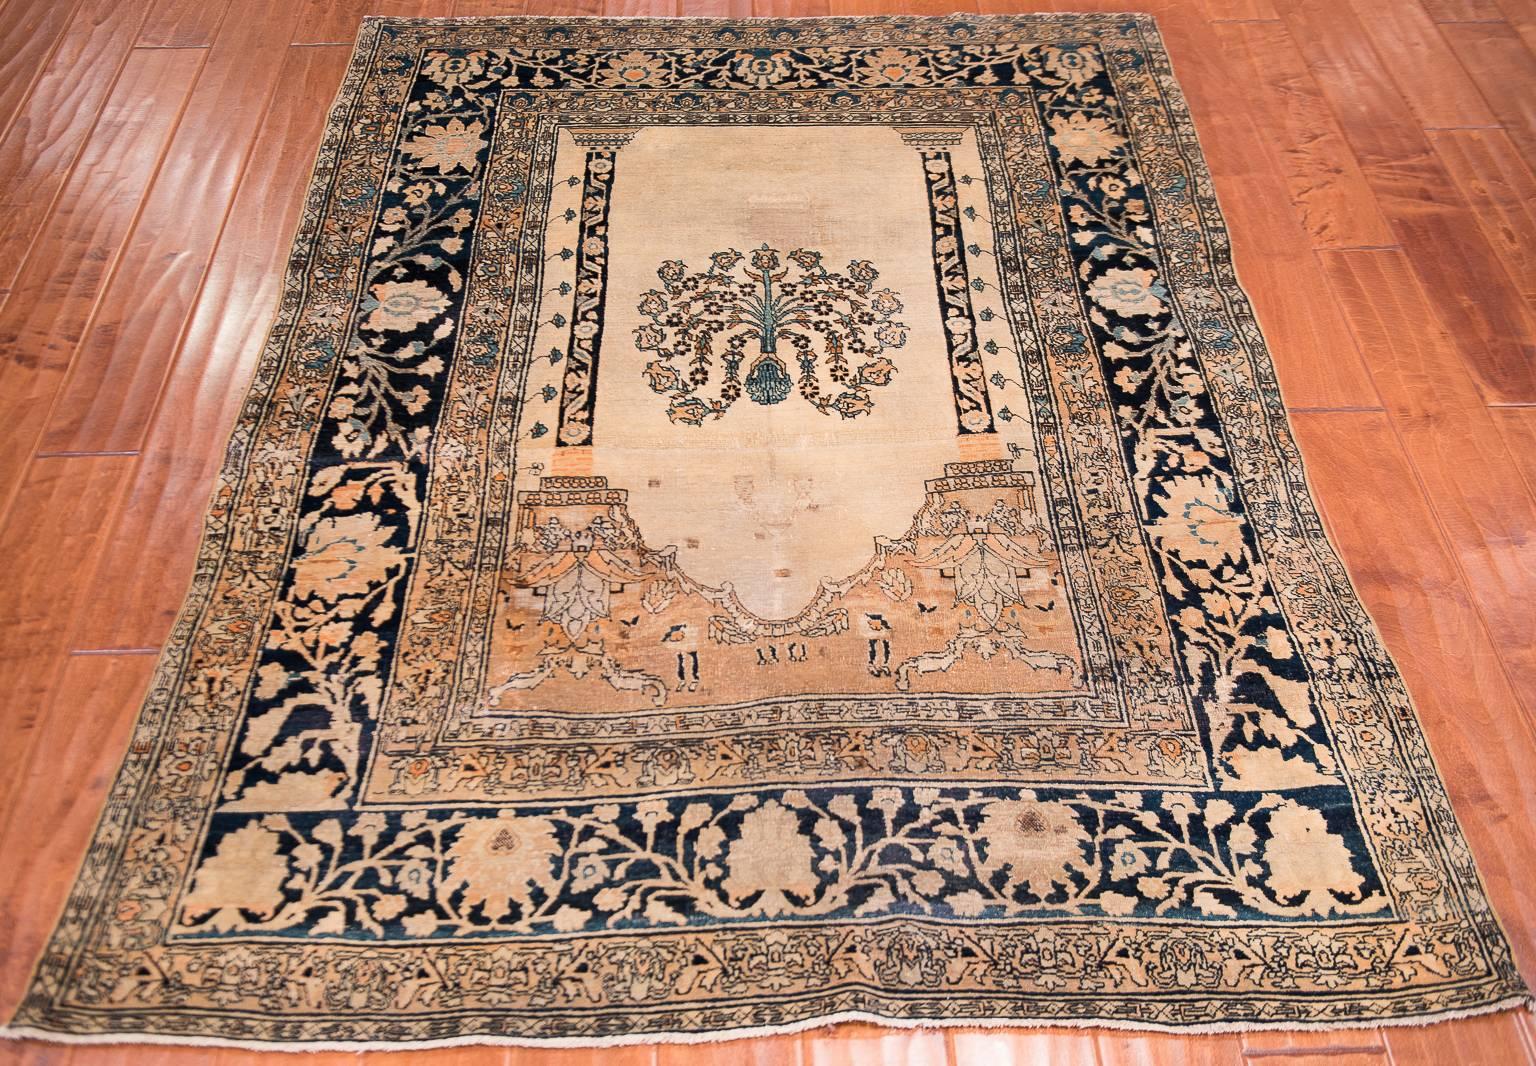 Mid-late 19th century Persian Tabriz prayer rug.
This Tabriz features a singular prayer niche marked out by the central tree on the ivory field.
The wool dyed in this ivory shines forth from this Persian carpet because of the very fine weave
with a